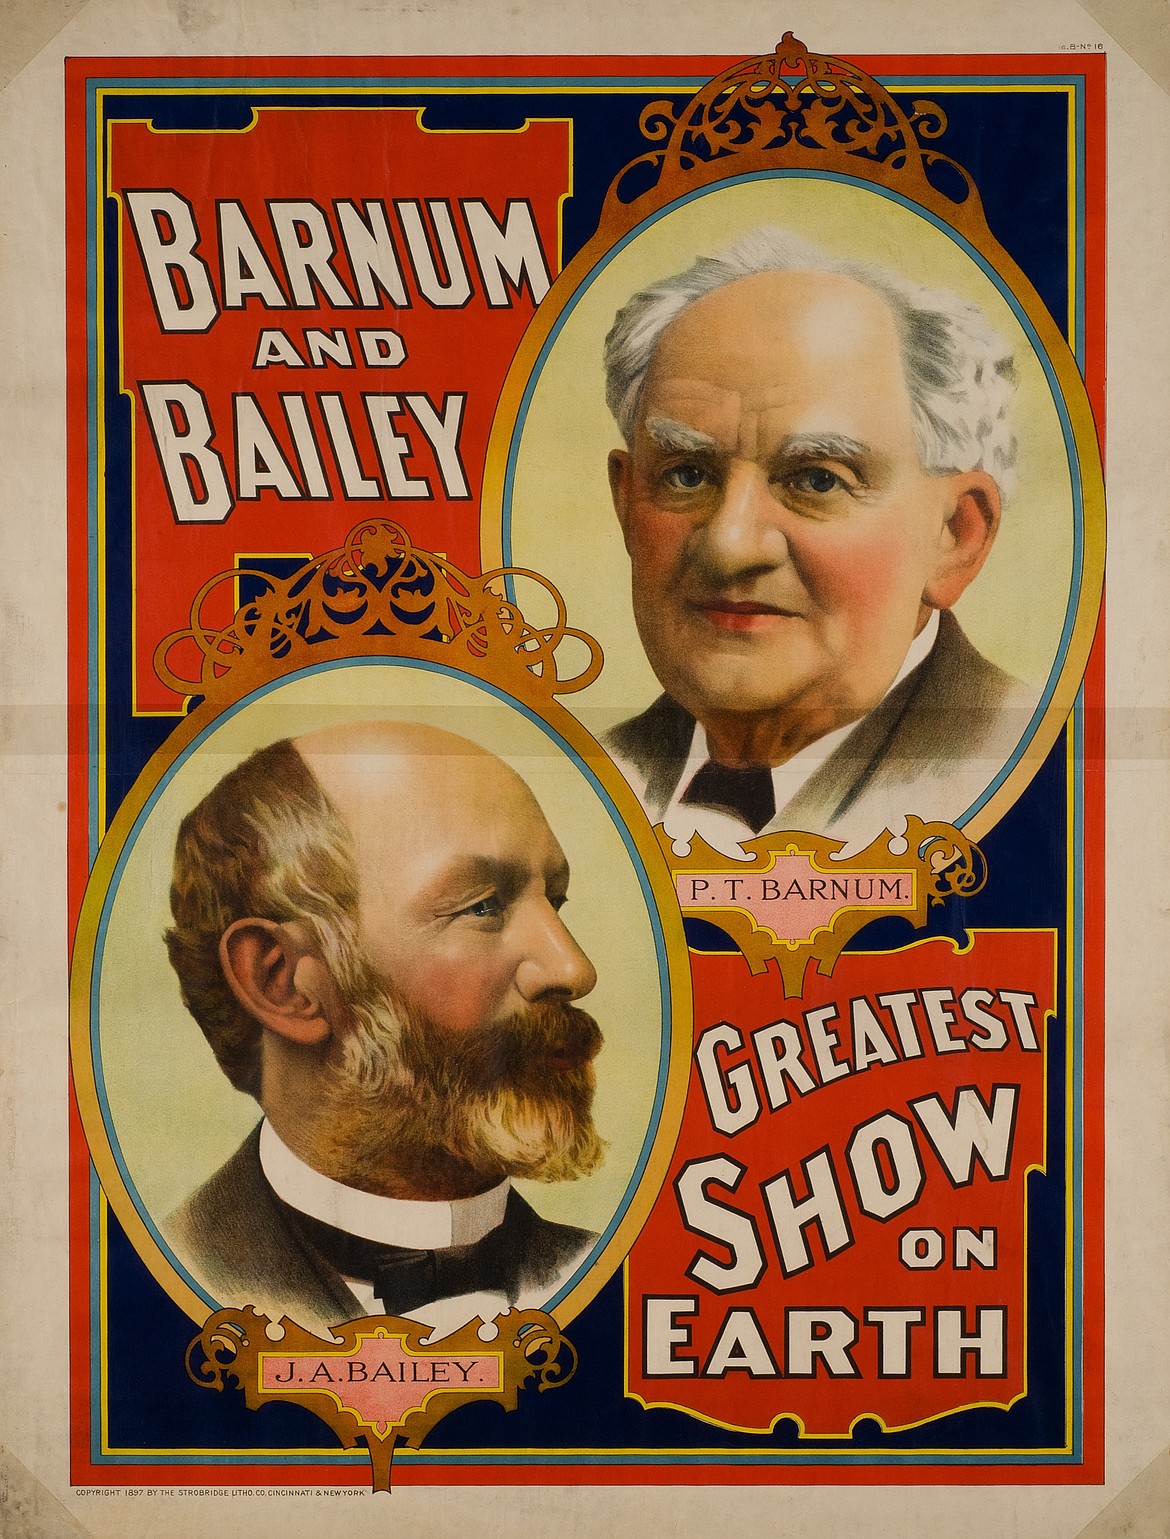 America’s greatest circus showmen, P.T. Barnum and James A. Bailey.